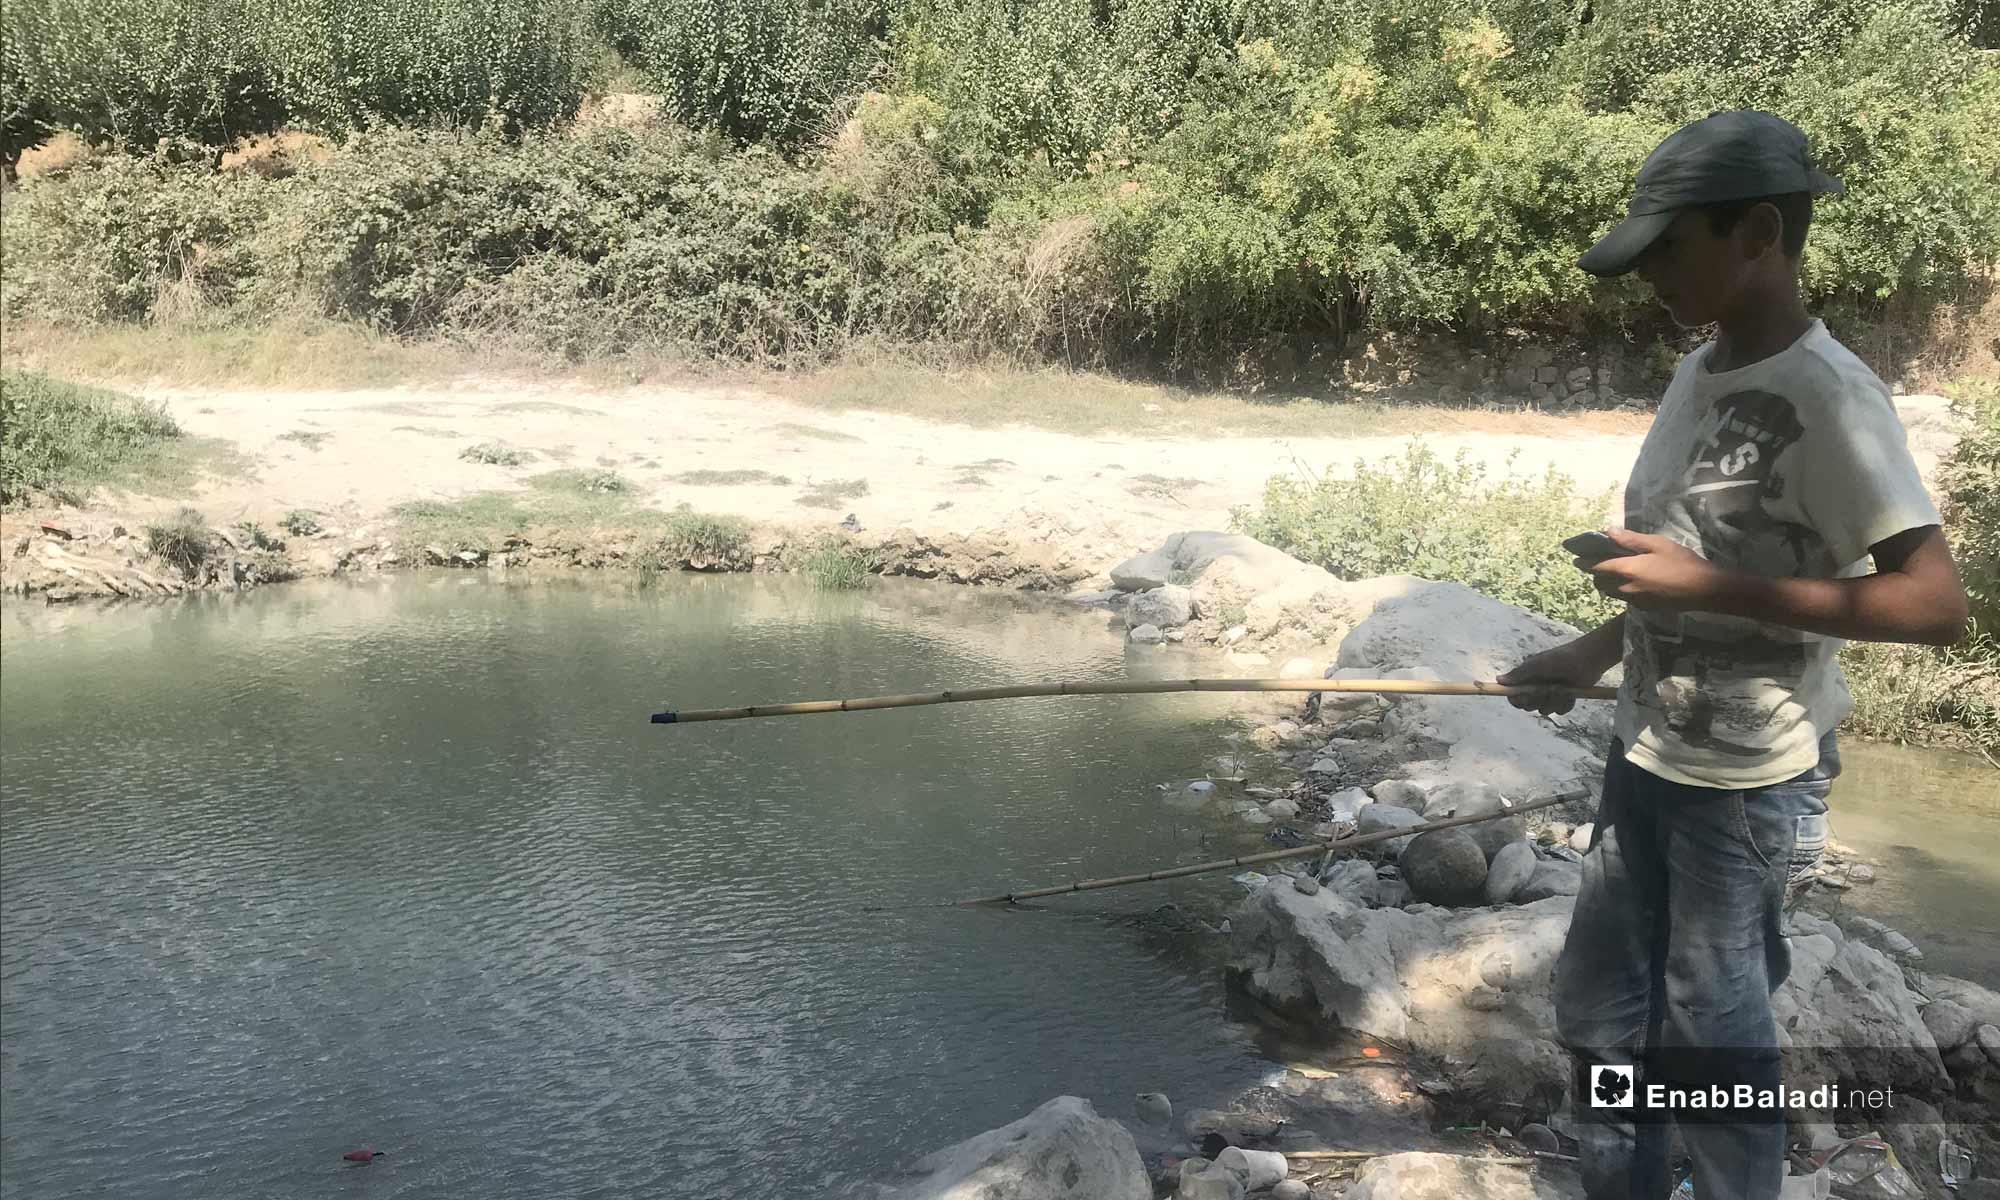 A young man fishing in the Assi River, near the city of Darkoush, western rural Idlib -September 8, 2019 (Enab Baladi)